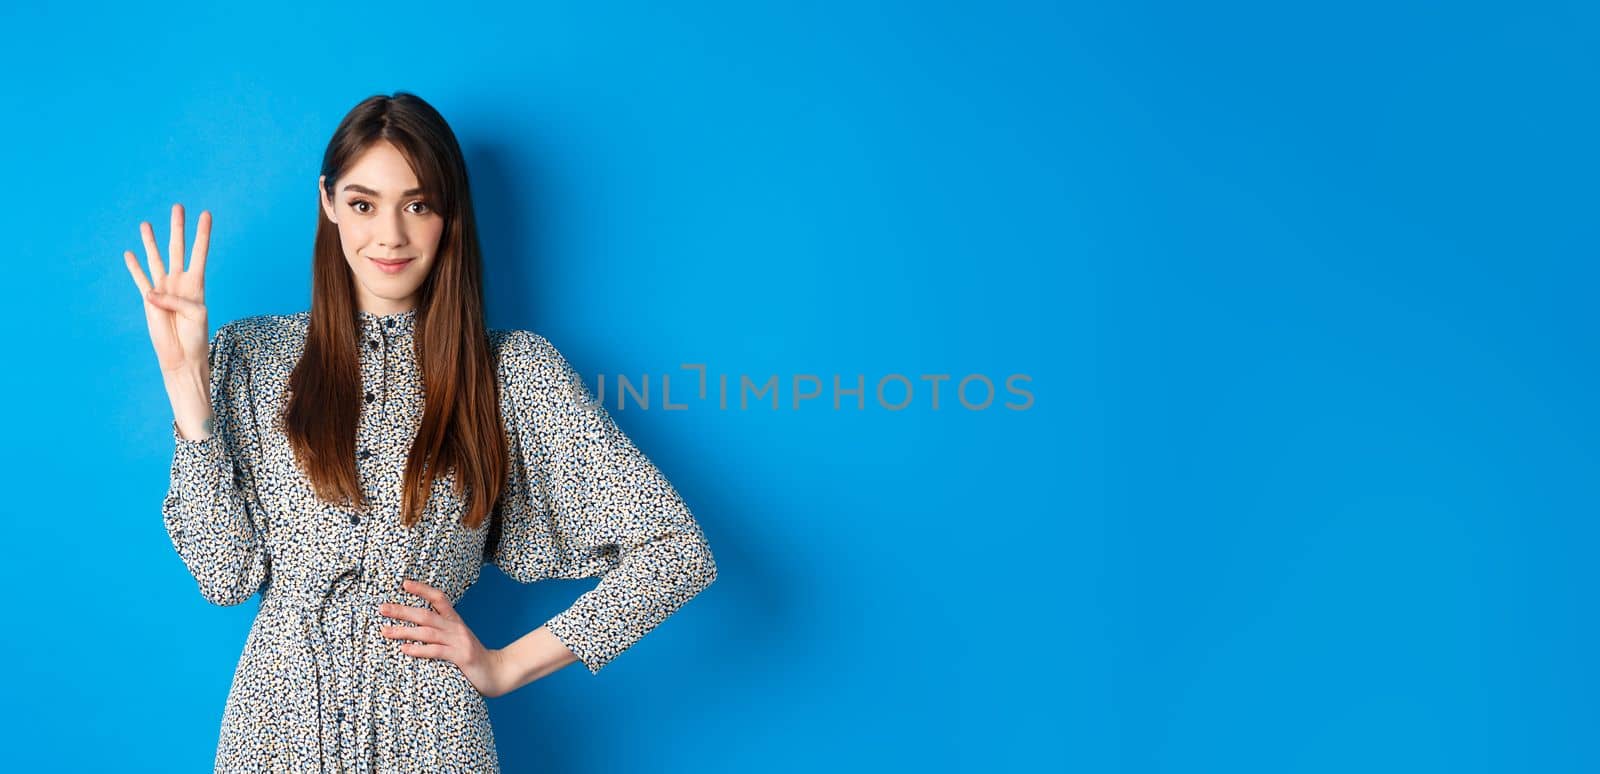 Young beautiful girl in dress with natural long hair, showing number four with fingers and smiling, standing against blue background.